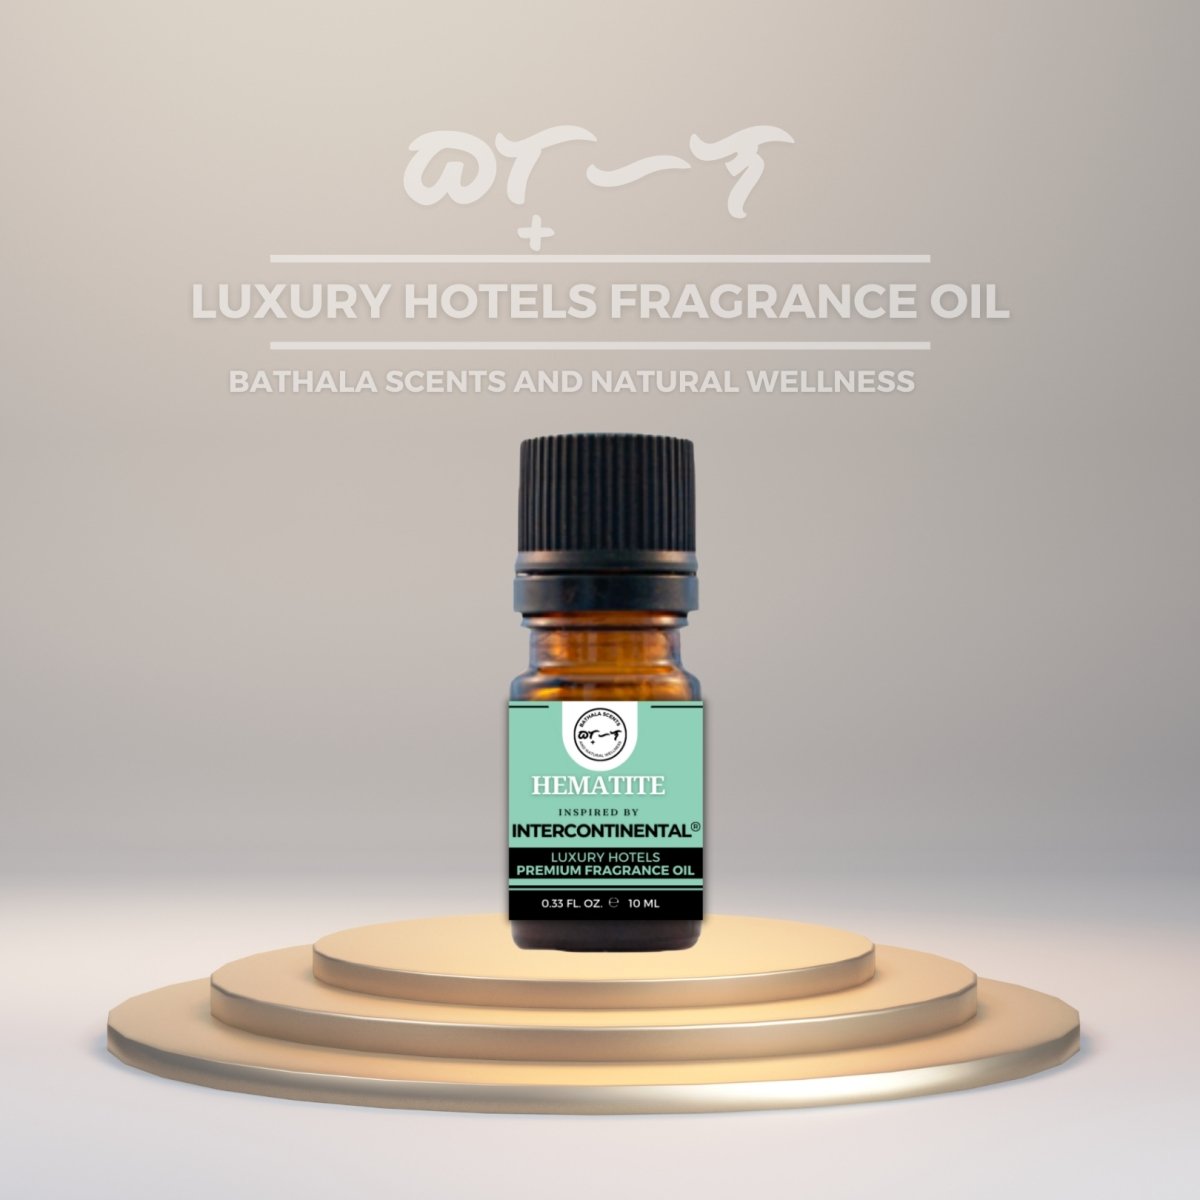 Hematite Inspired by Intercontinental Luxury Hotels Fragrance Oil 10ml - Bathala Scents and Natural Wellness